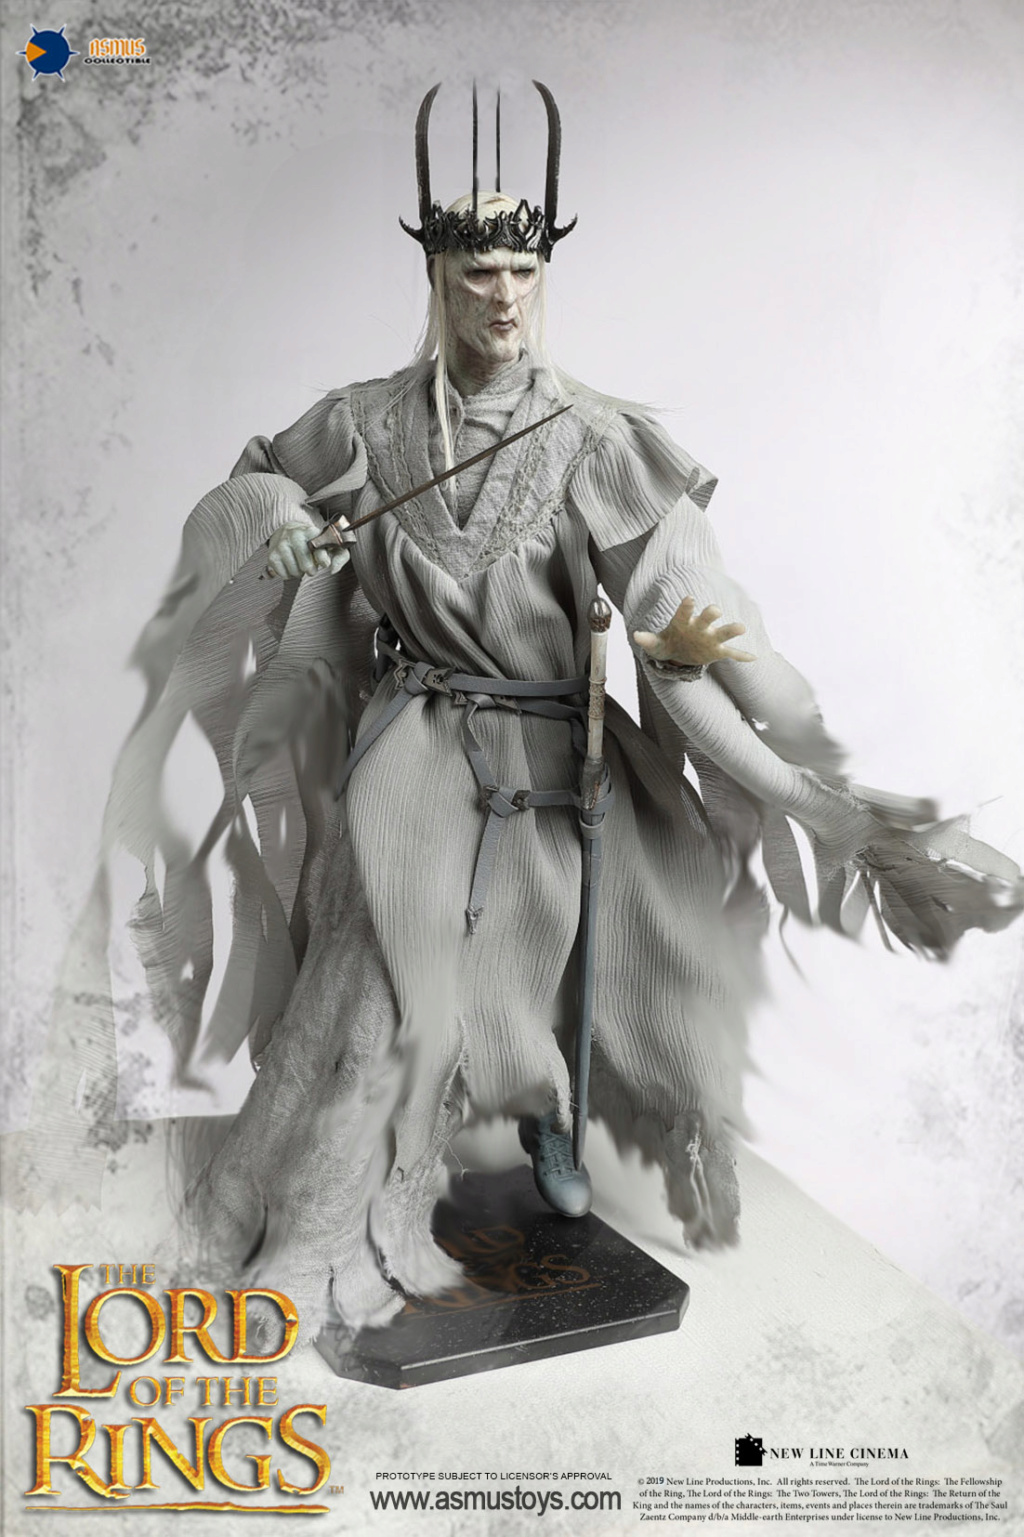 NEW PRODUCT: ASMUS TOYS THE LORD OF THE RING SERIES: TWILIGHT WITCH-KING Twk04a10